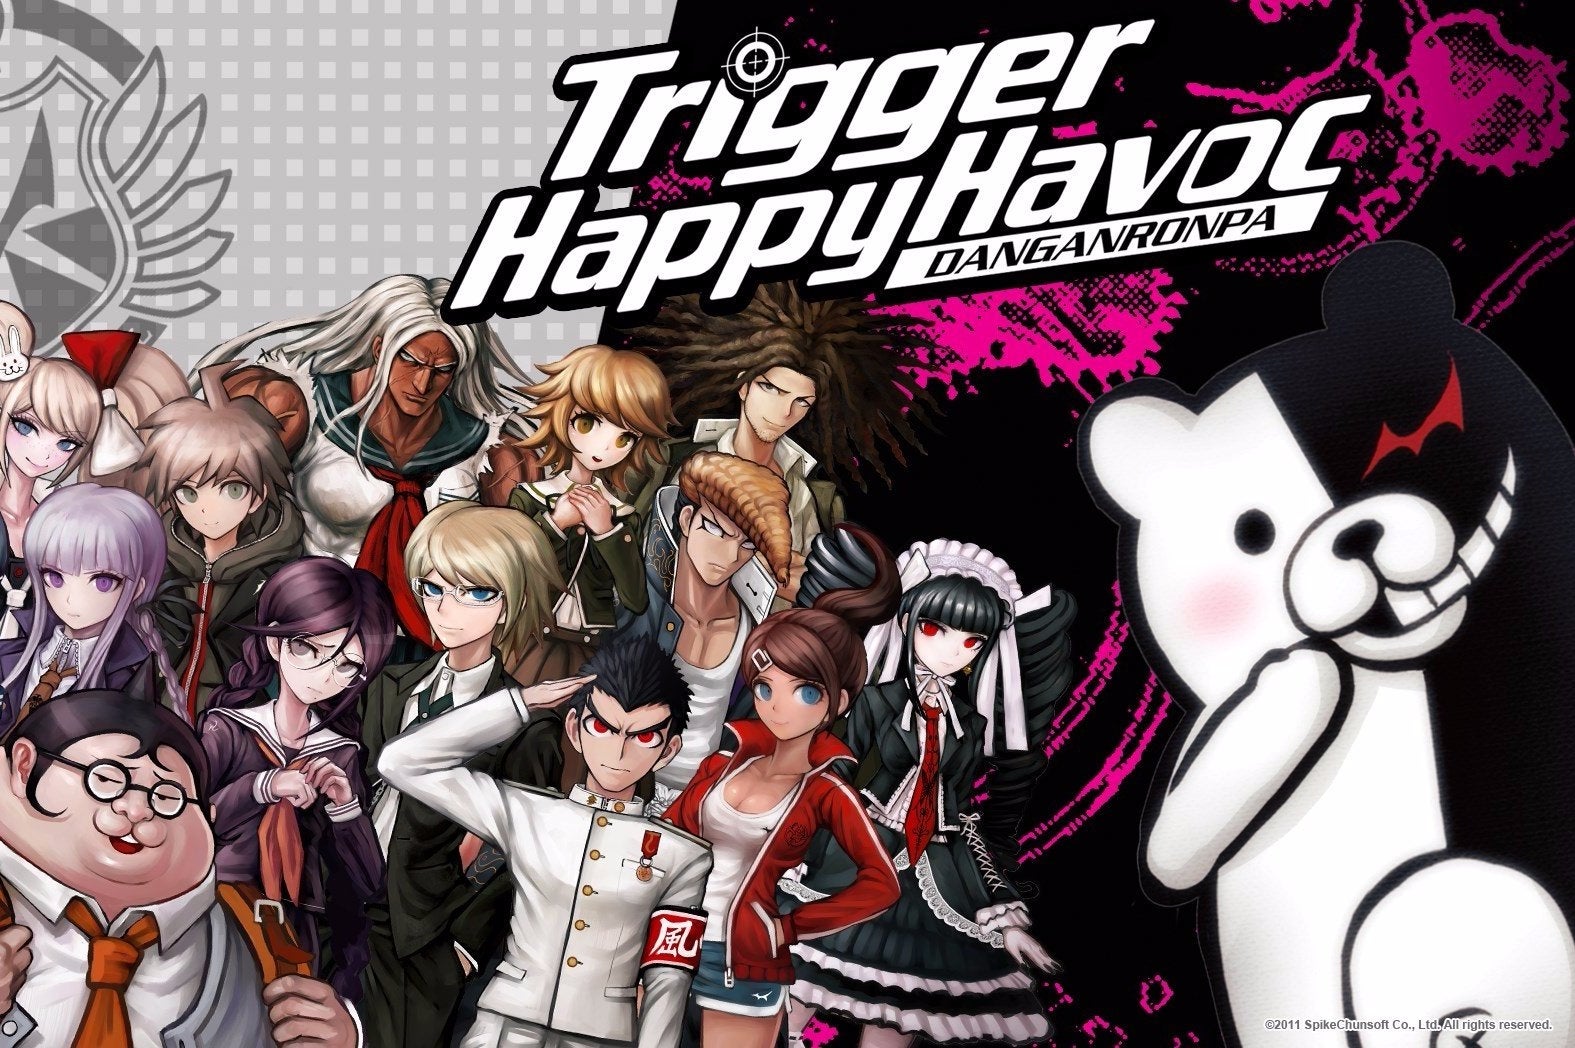 Why is Danganronpa so viciously appealing? 